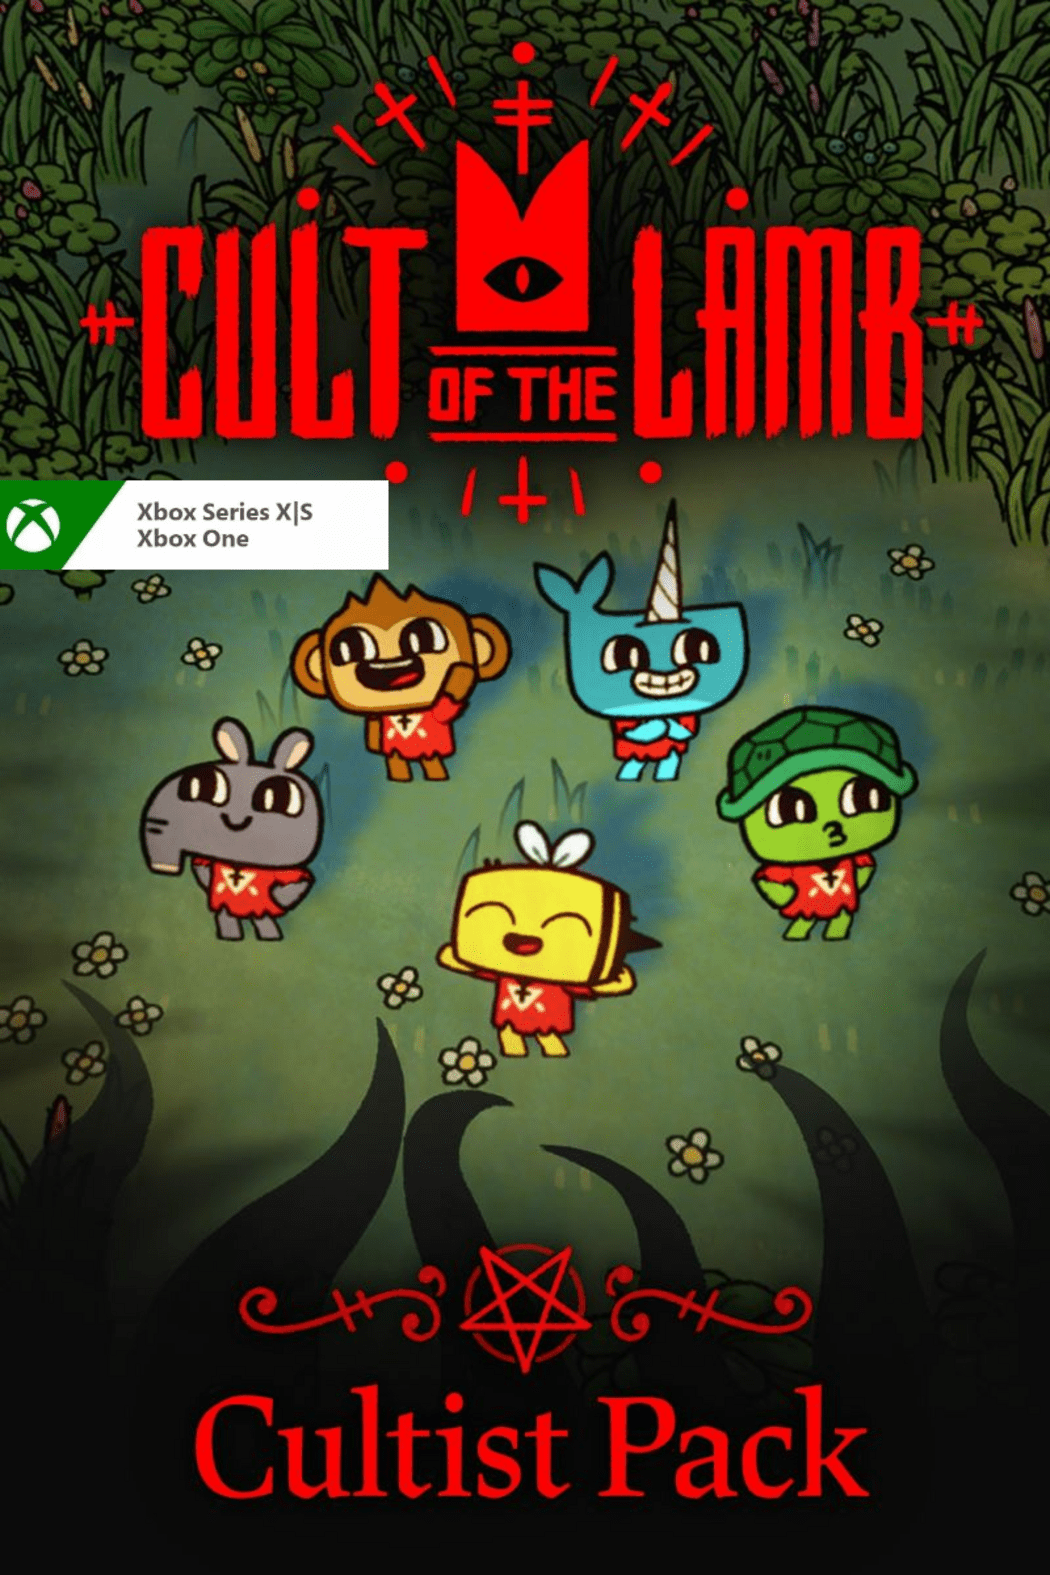 Cult of the Lamb: Cultist Pack DLC (AR) (Xbox One / Xbox Series X|S) - Xbox Live - Digital Code